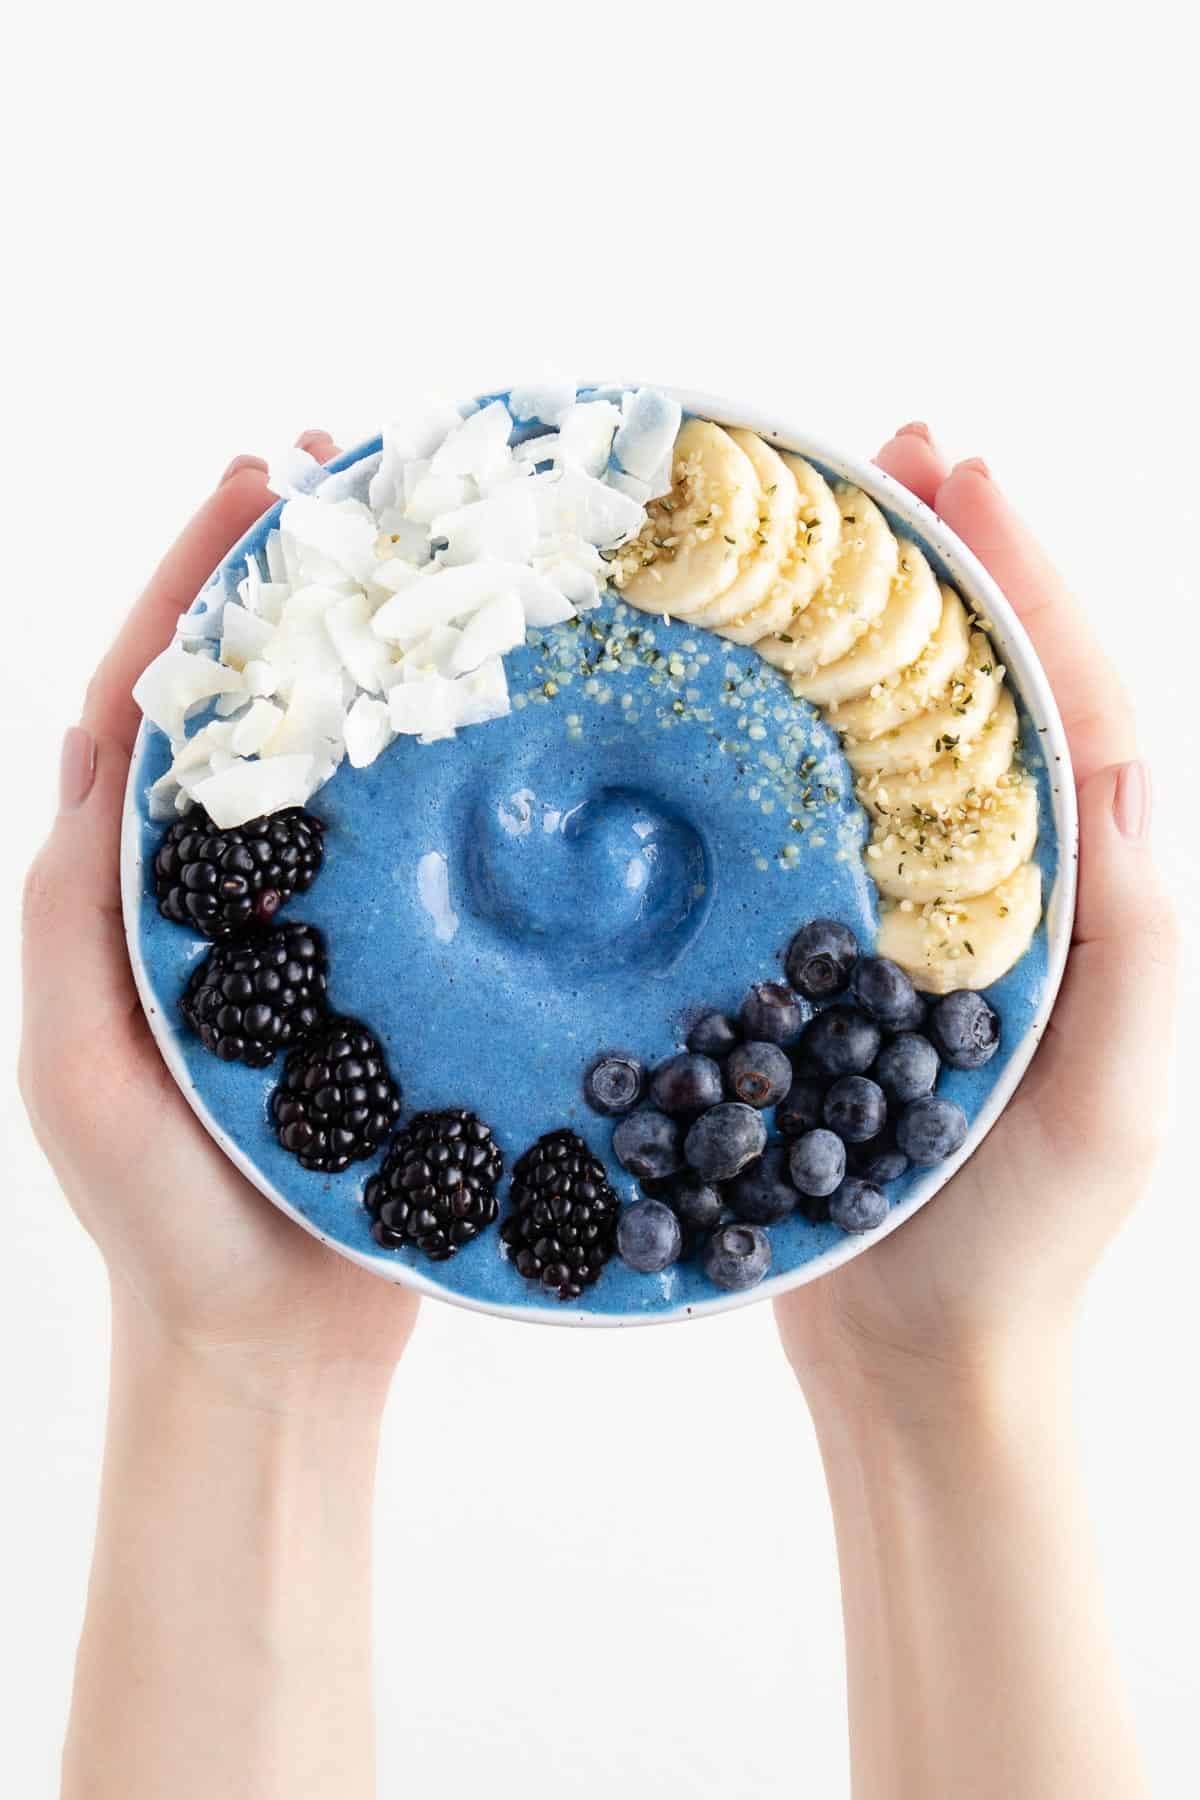 two hands holding a blue smoothie bowl